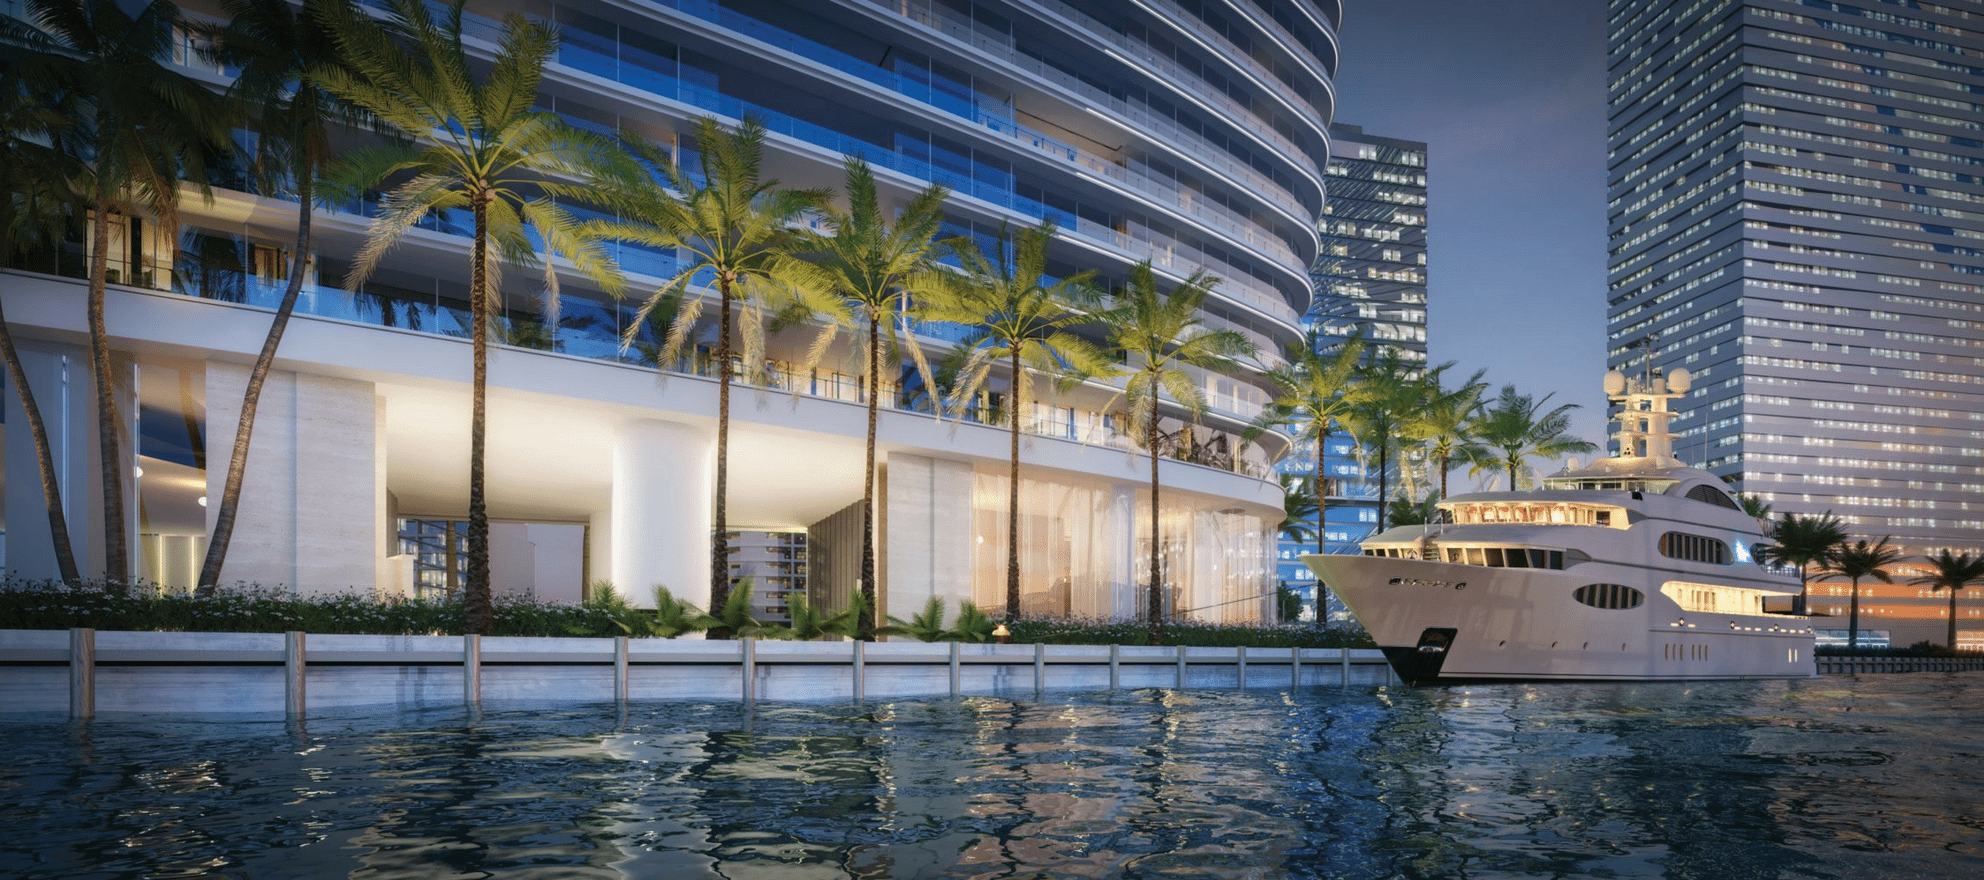 The Miami River’s Reputation is on an Upswing 